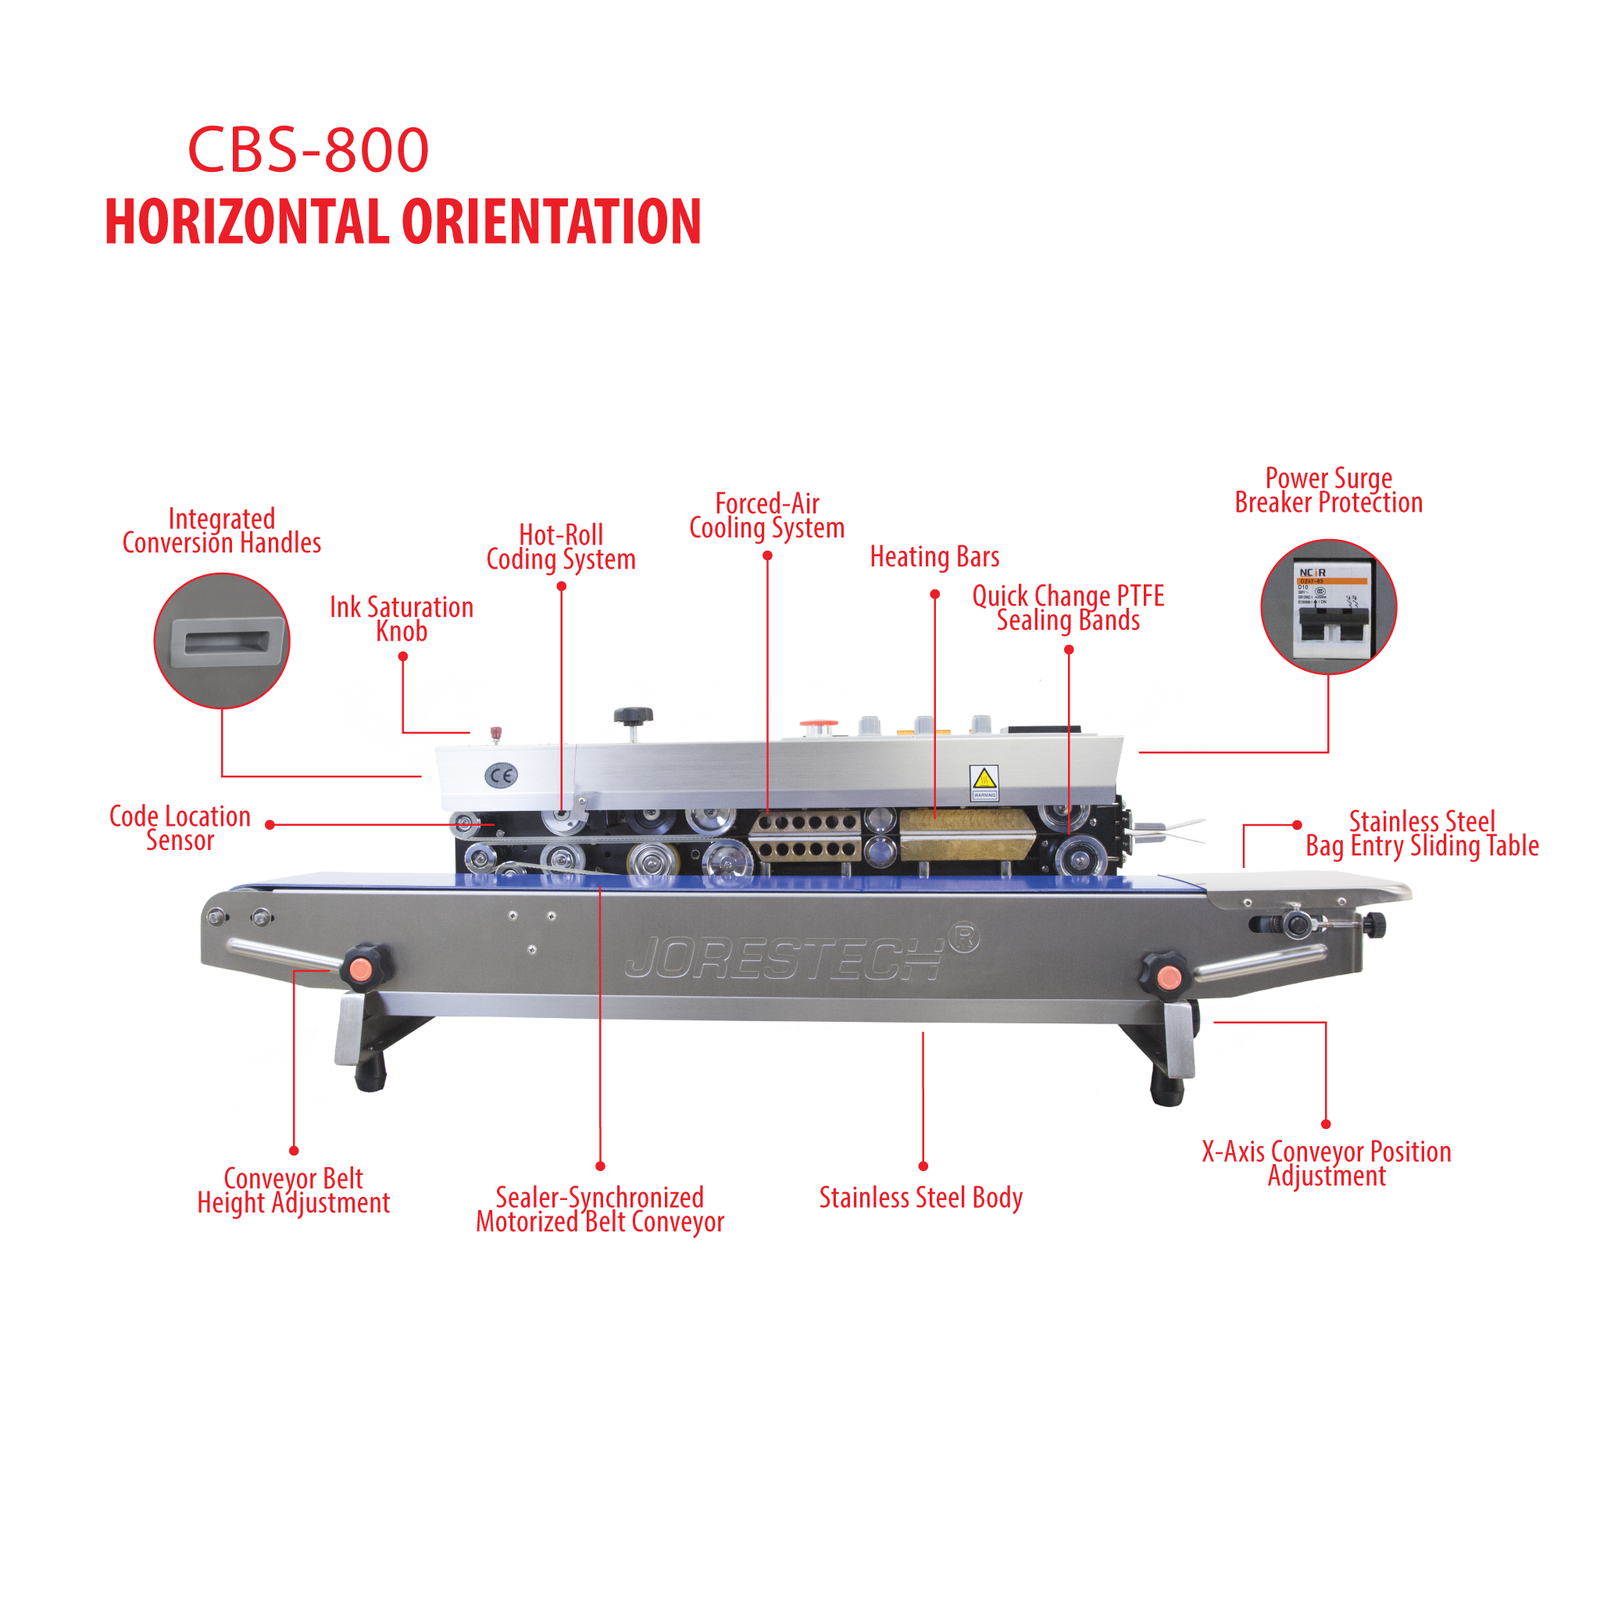 Features of the 220v stainless steel digital continuous band sealer with coder set for horizontal applications